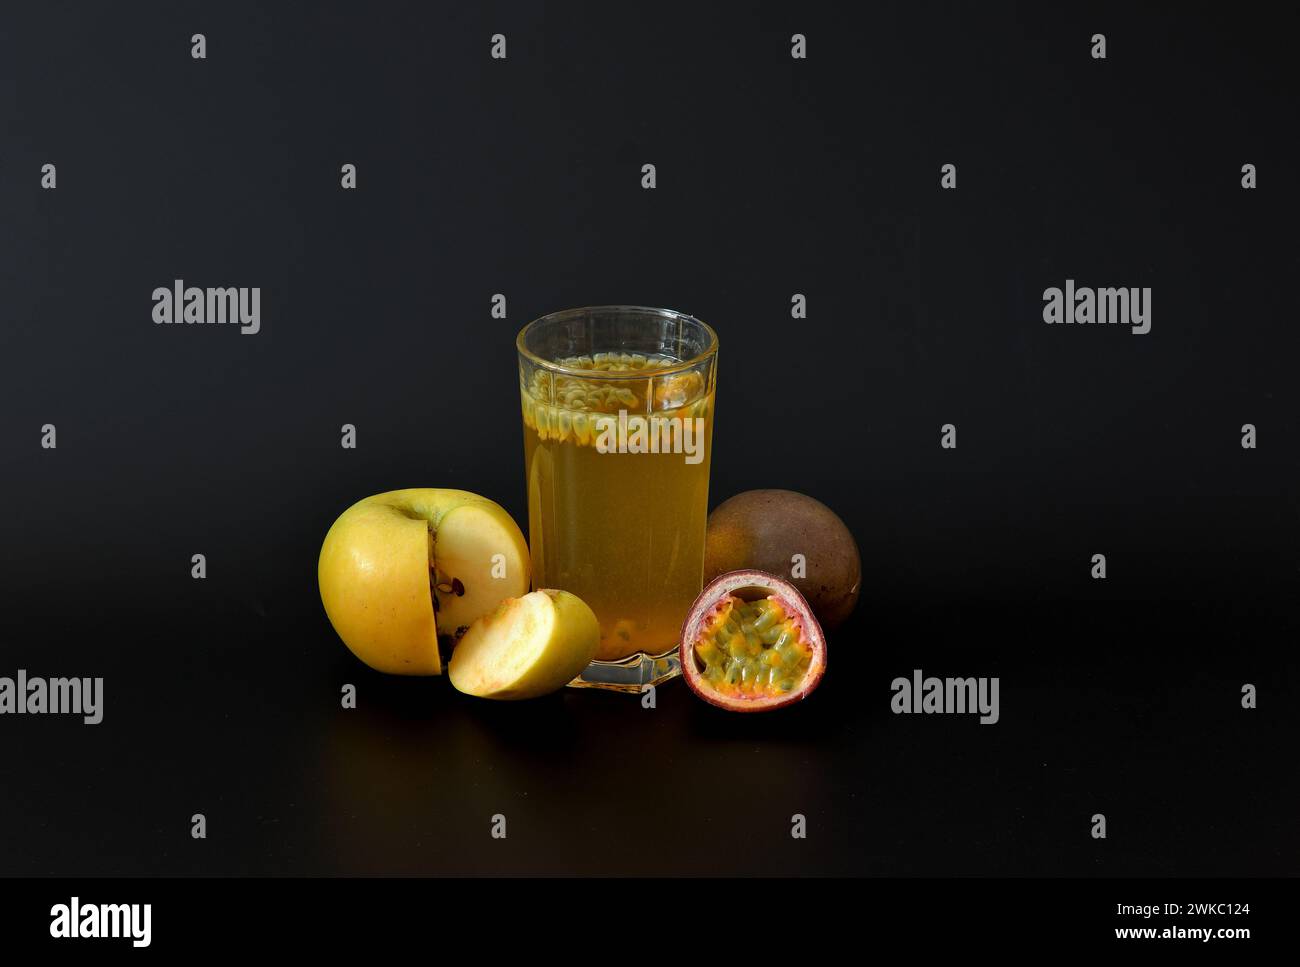 A glass of fresh fruit juice with seeds on a black background, next to a ripe yellow apple and pieces of passion fruit. Close-up. Stock Photo